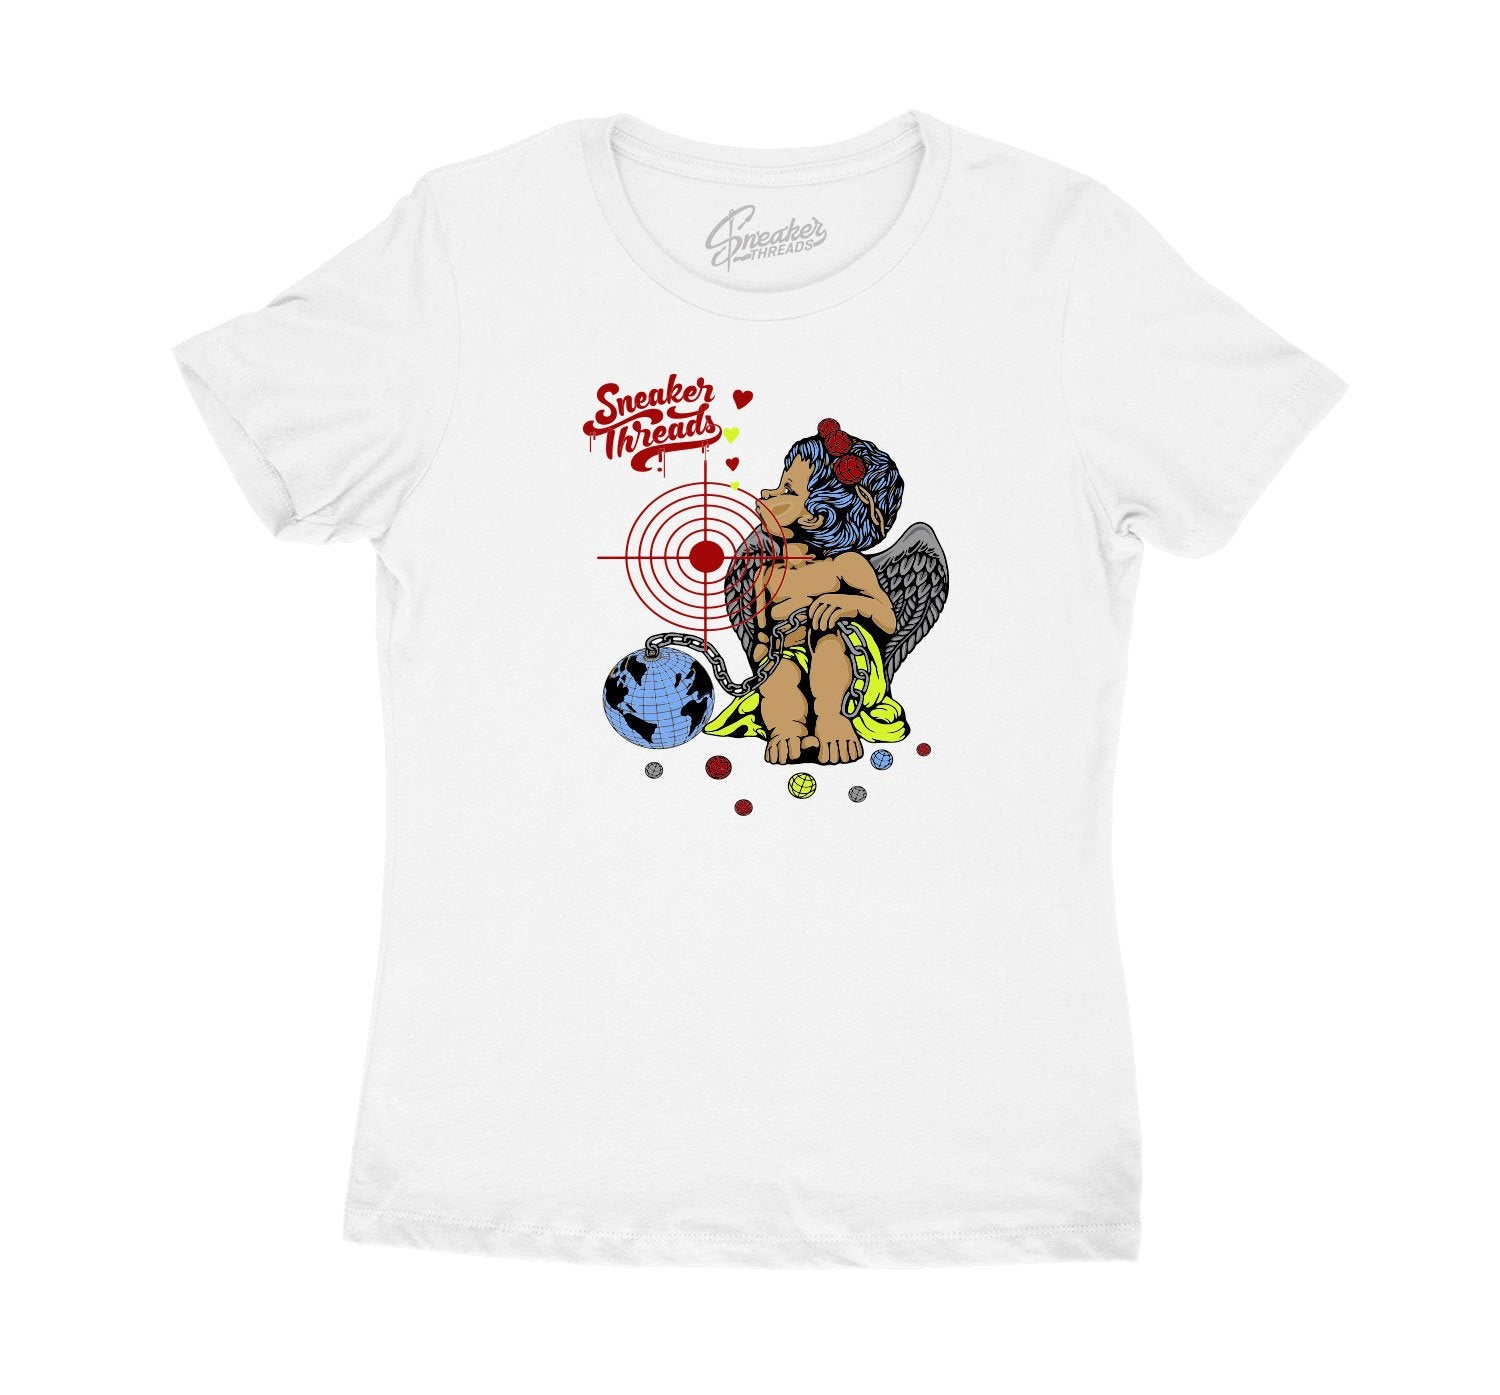 Womens shirt created to match the yeezy yecheil 350 shoe collection 